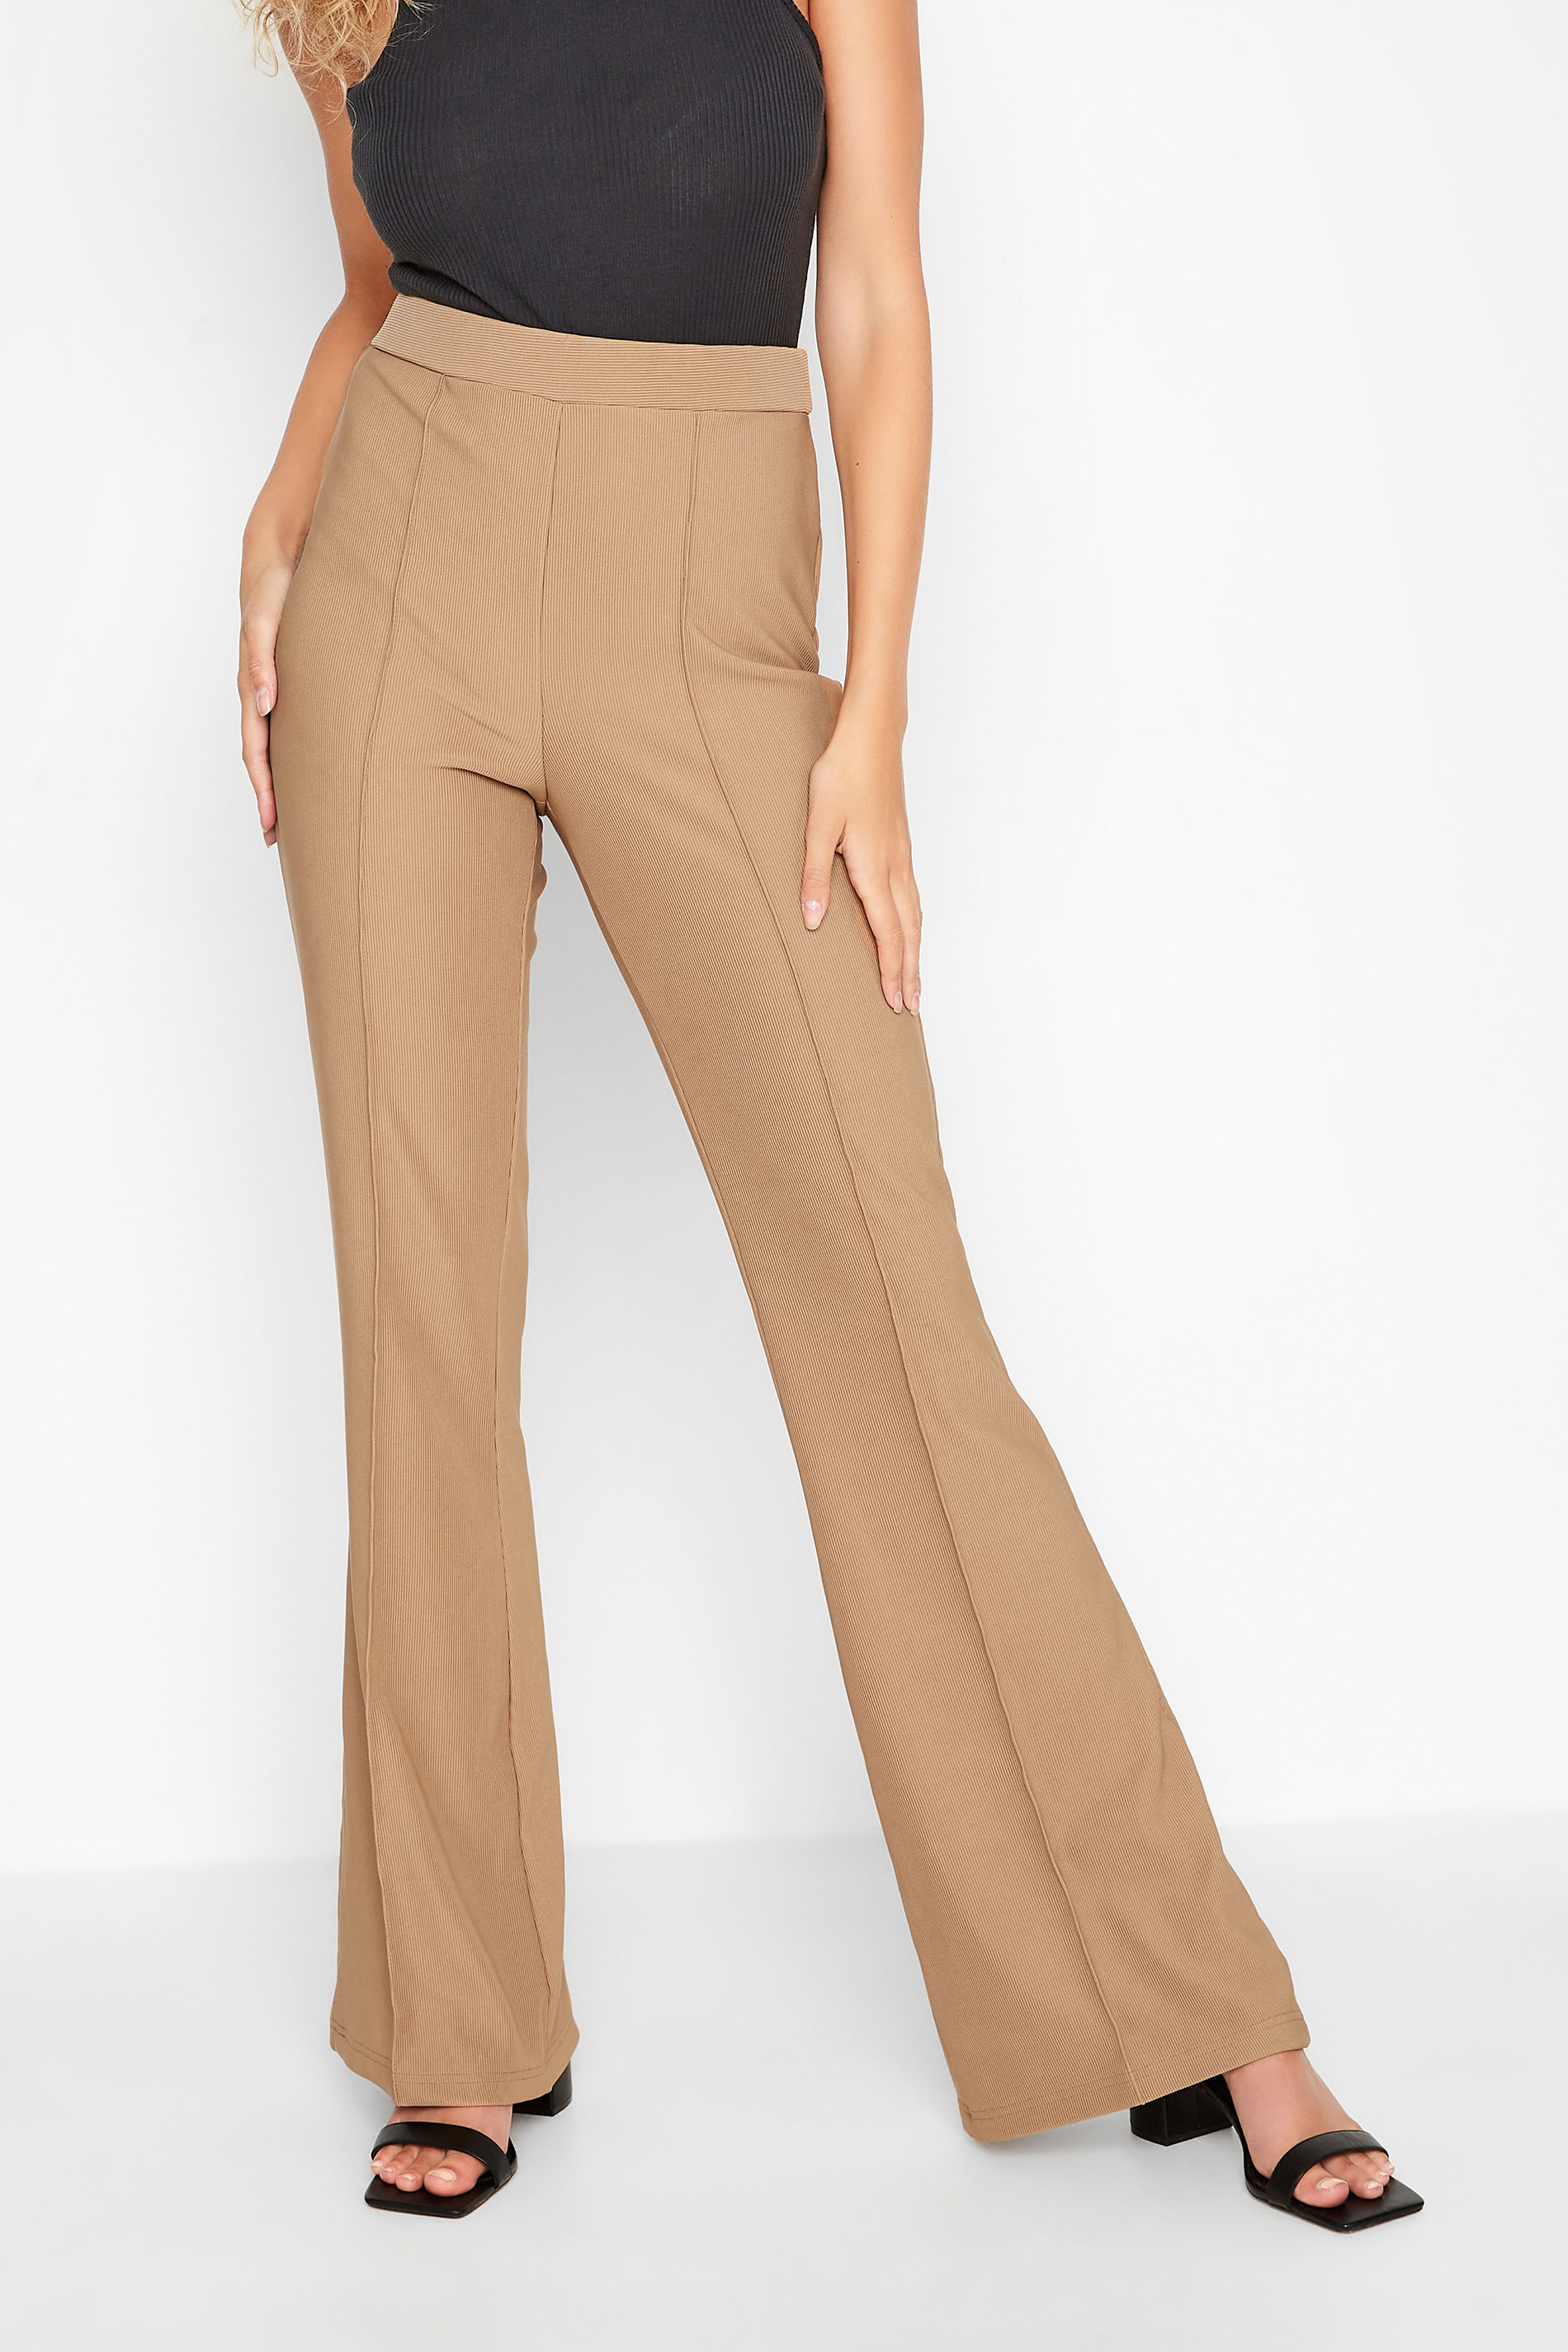 LTS Tall Women's Camel Brown Ribbed Kick Flare Trousers | Long Tall Sally  1